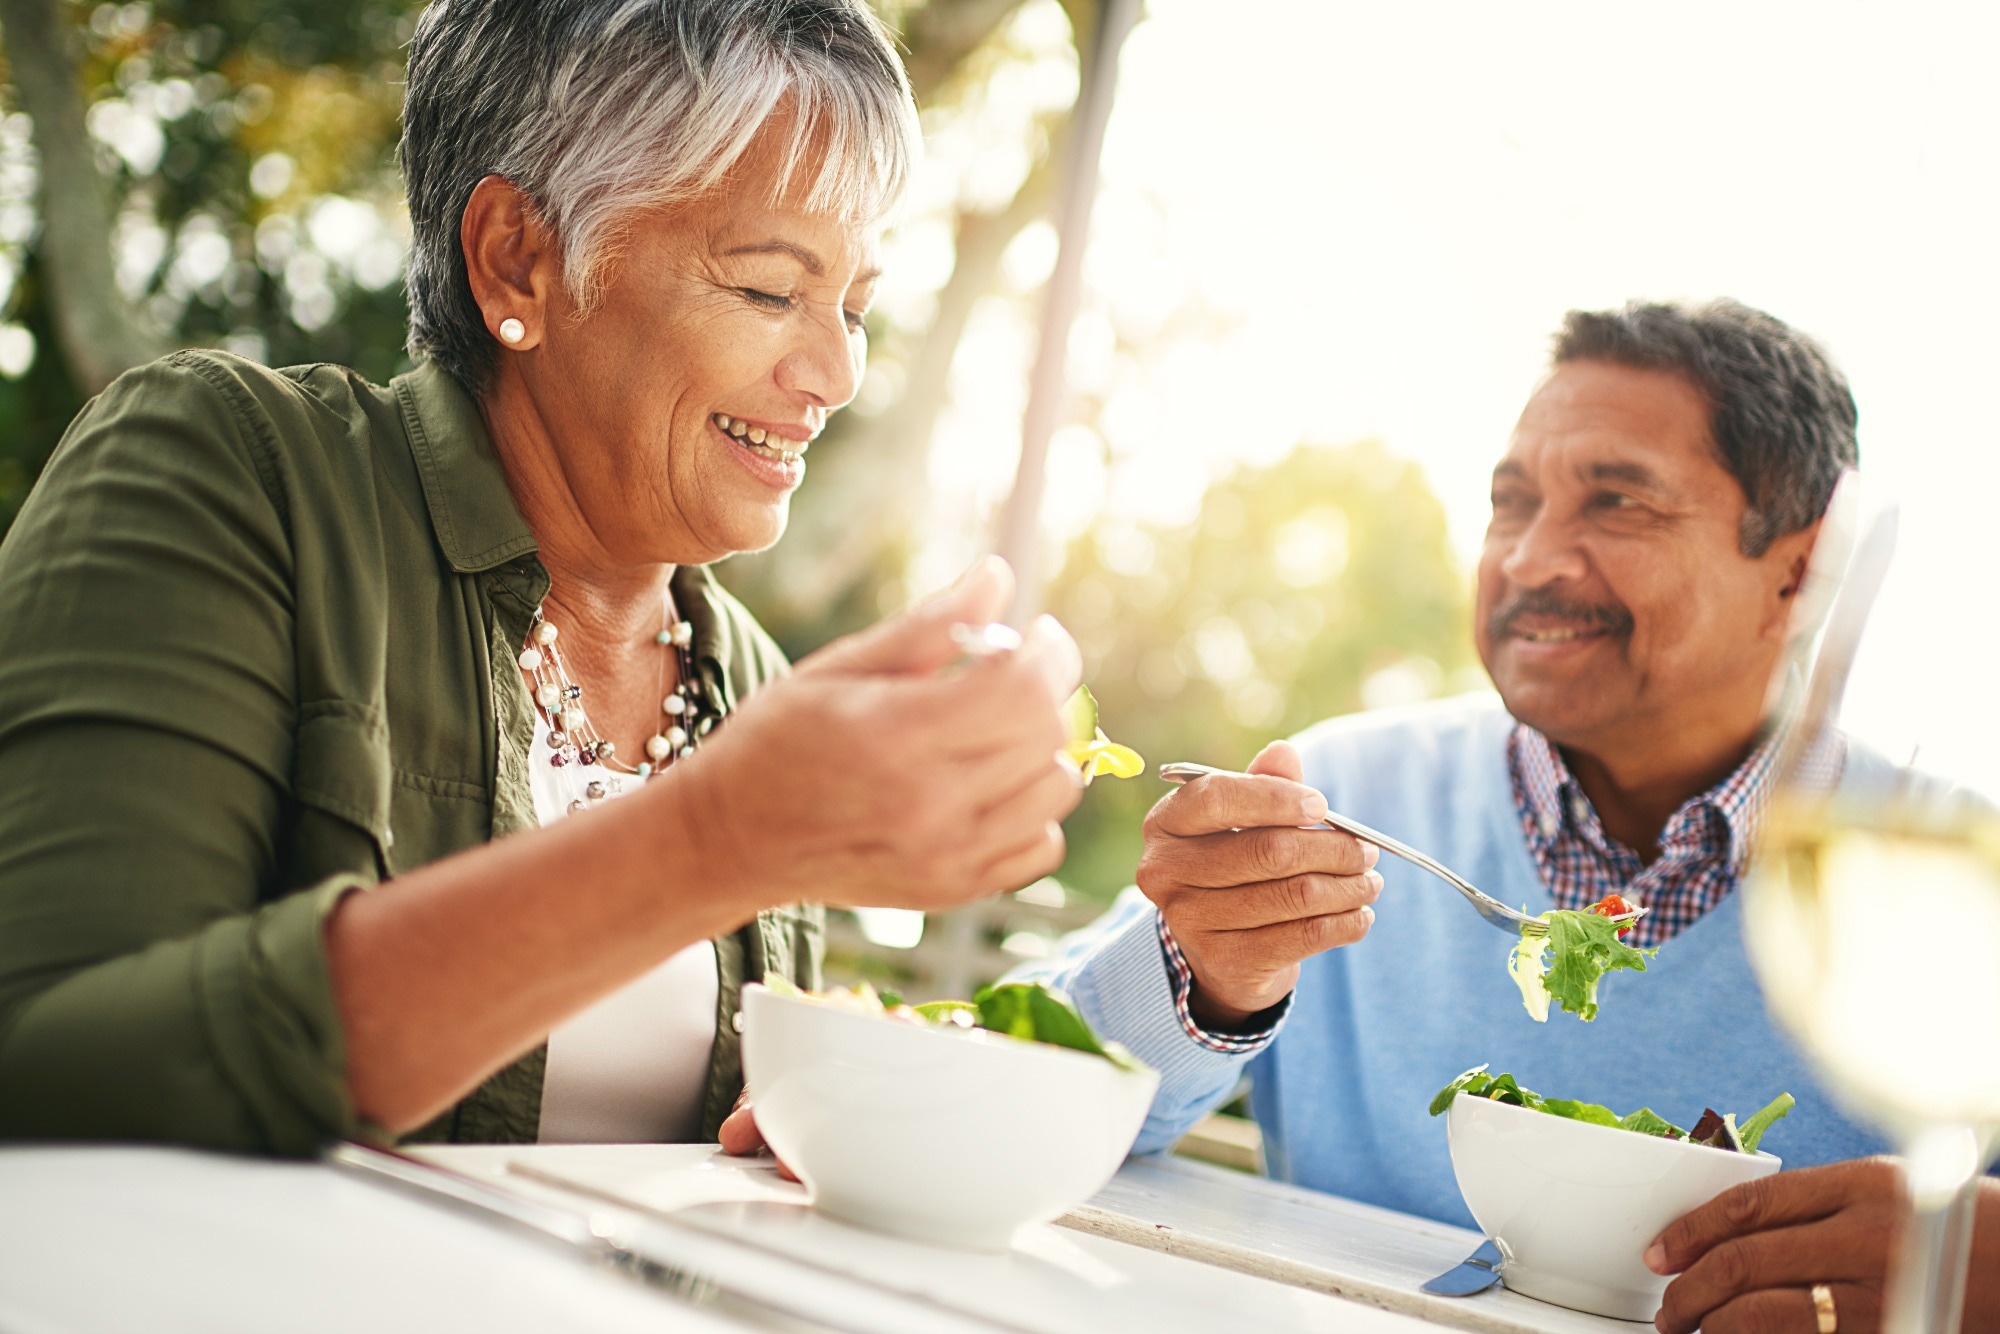 Study: Adherence to Mediterranean diet is inversely associated with depressive symptoms in older women: findings from the NutBrain Study. Image Credit: PeopleImages.com - Yuri A / Shutterstock.com